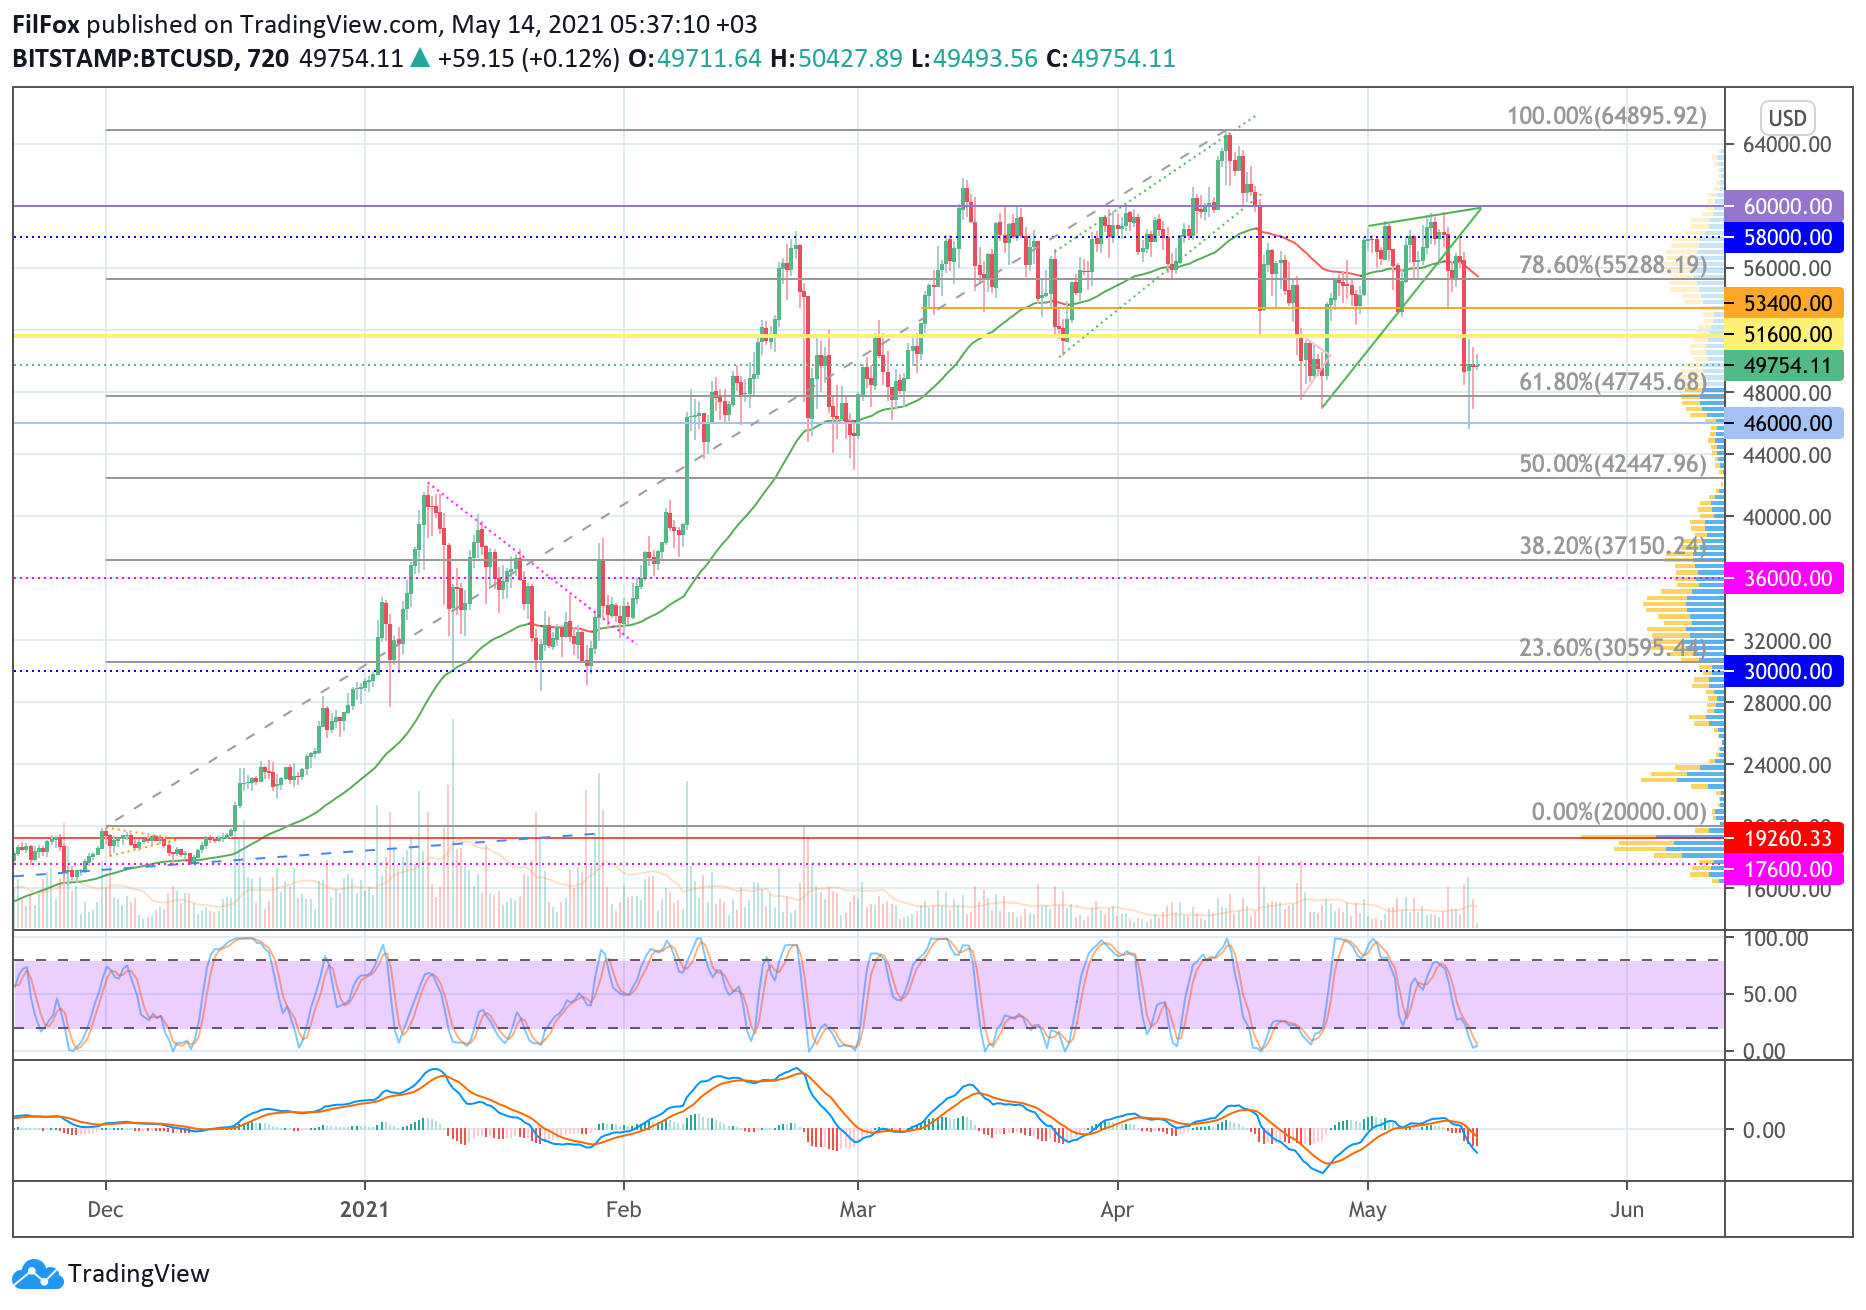 Analysis of the prices of Bitcoin, Ethereum, XRP for 05/14/2021